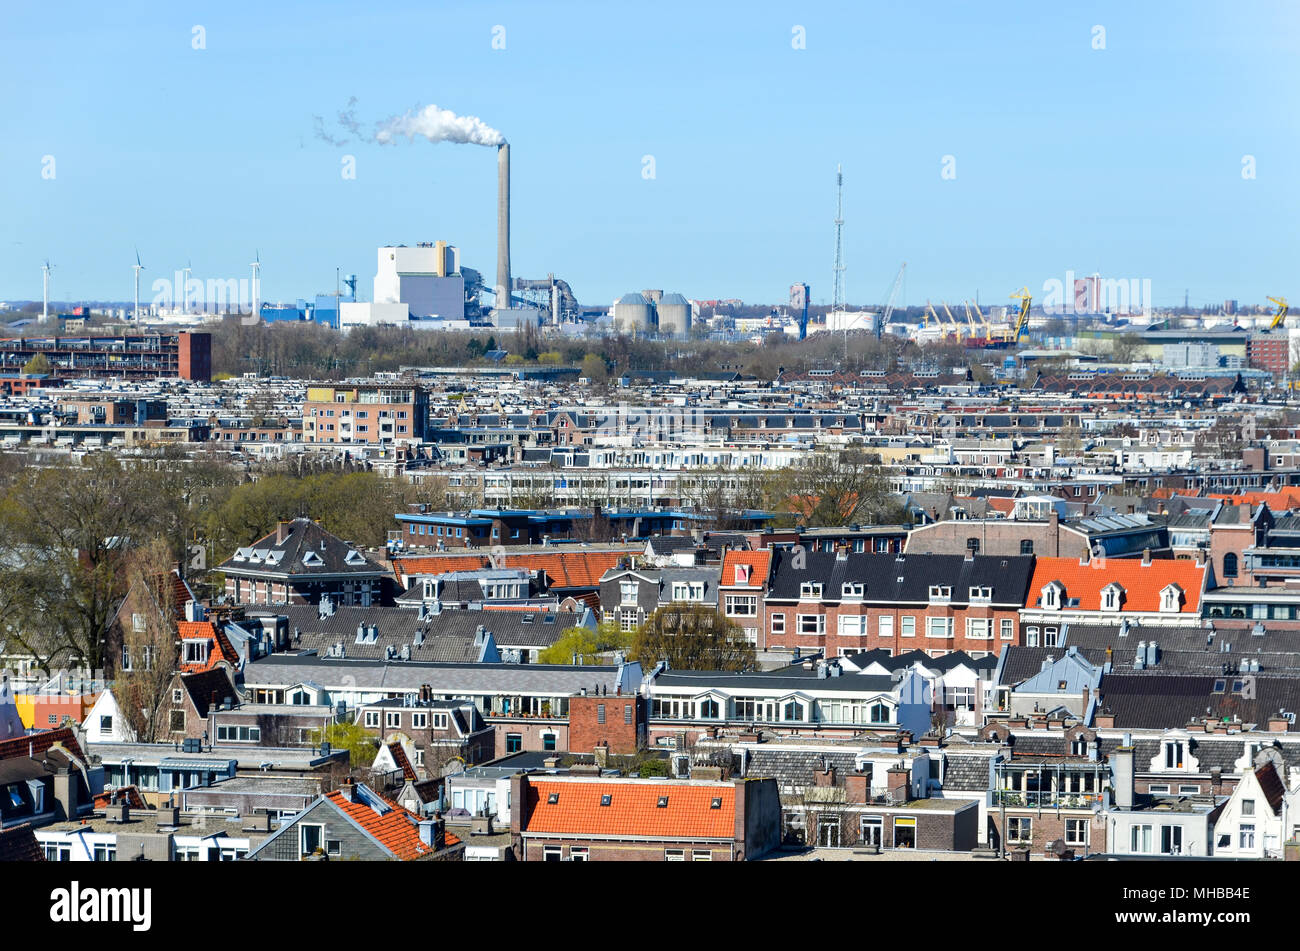 Aerial view of Amsterdam (Jordaan district) with a chimney in the background, Netherlands Stock Photo